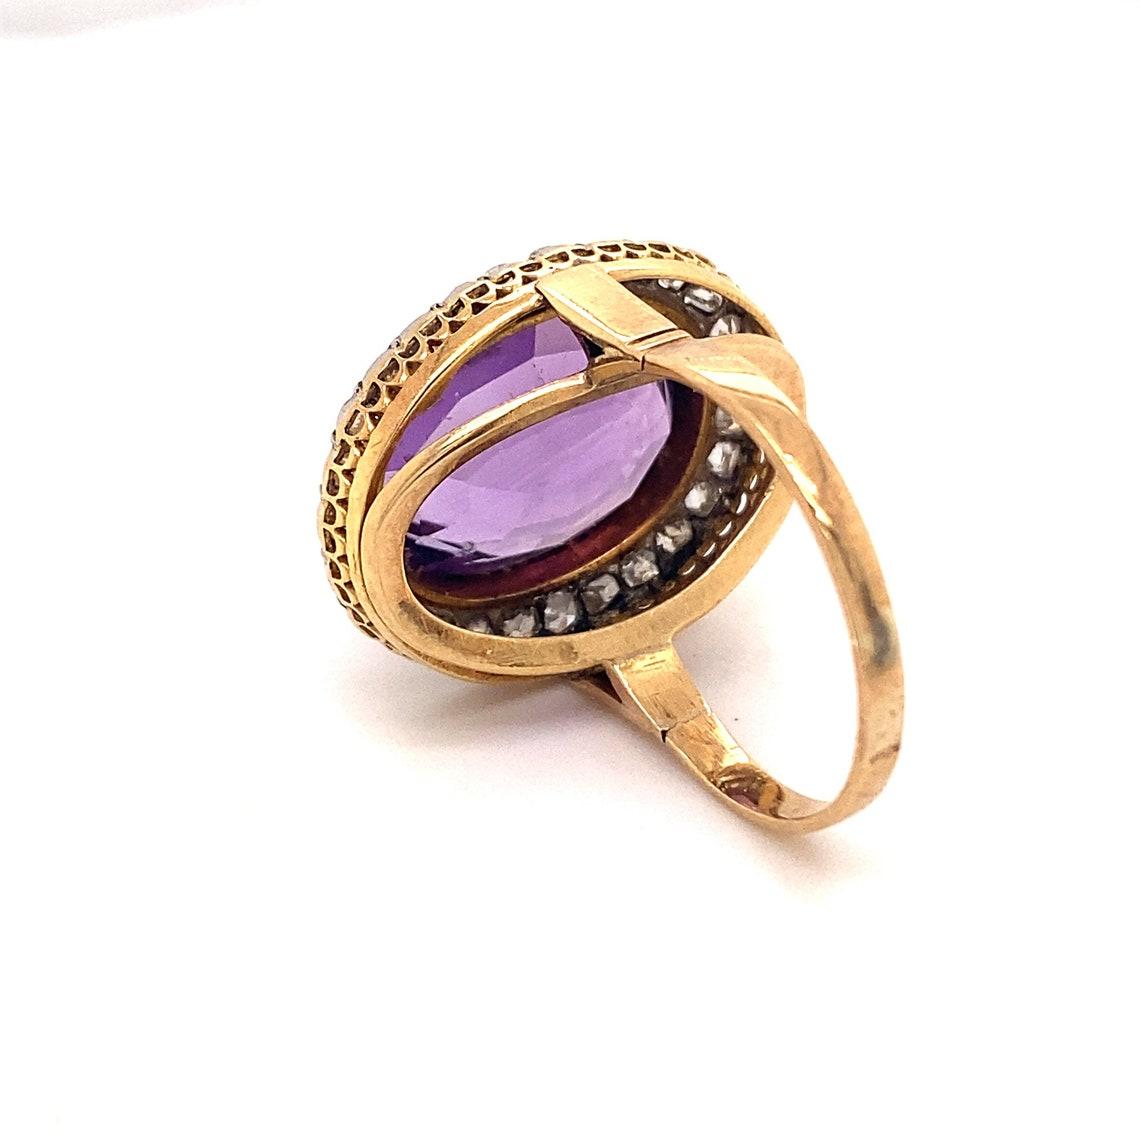 10 Carat Vintage Amethyst Diamond Ring 18 Karat Yellow Gold In Excellent Condition For Sale In Barnsley, GB